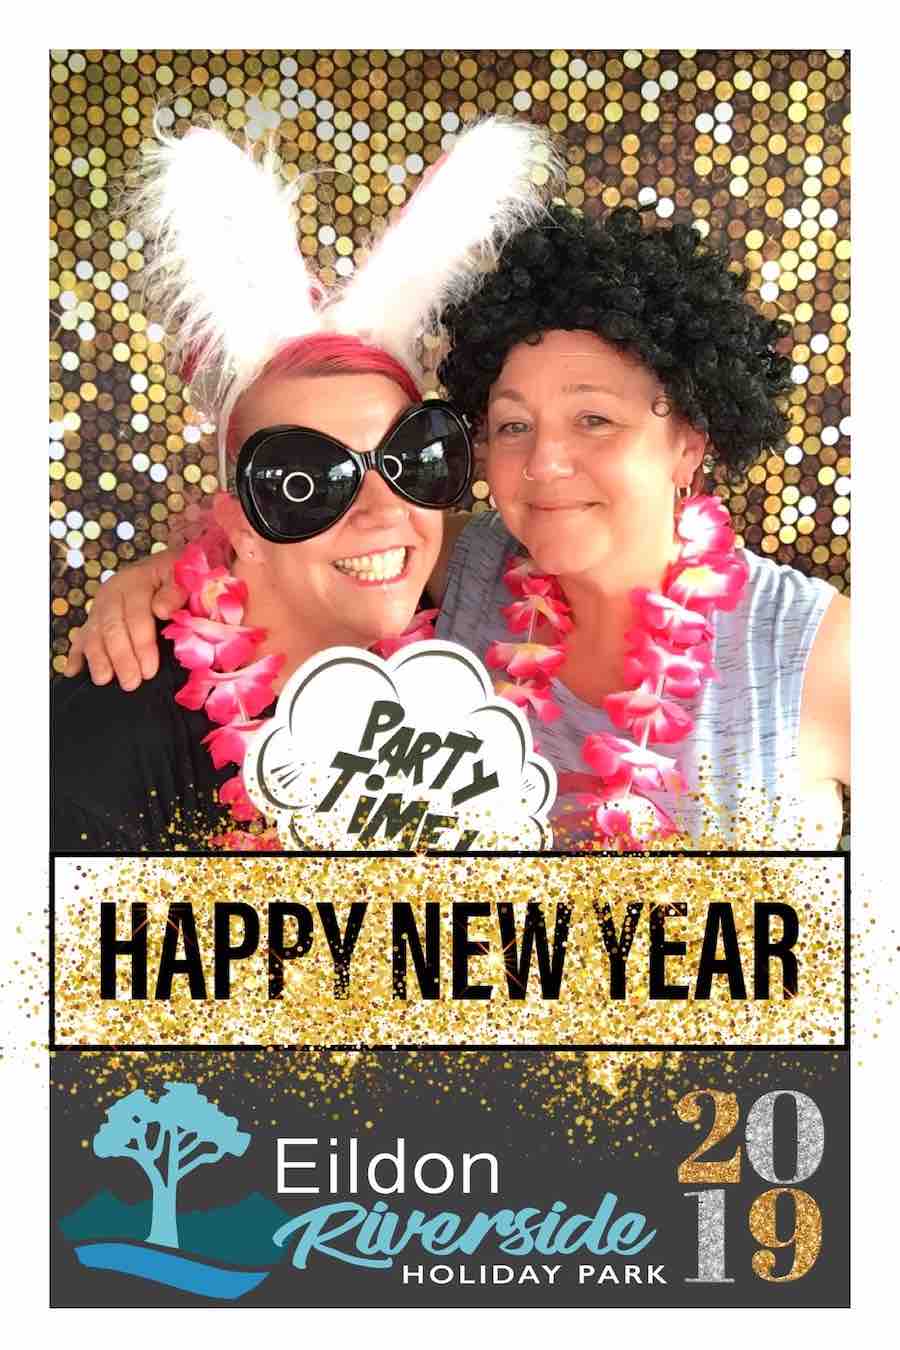 Eildon Riverside Holiday Park - New Years Eve 2019 photo strip with 2 ladies